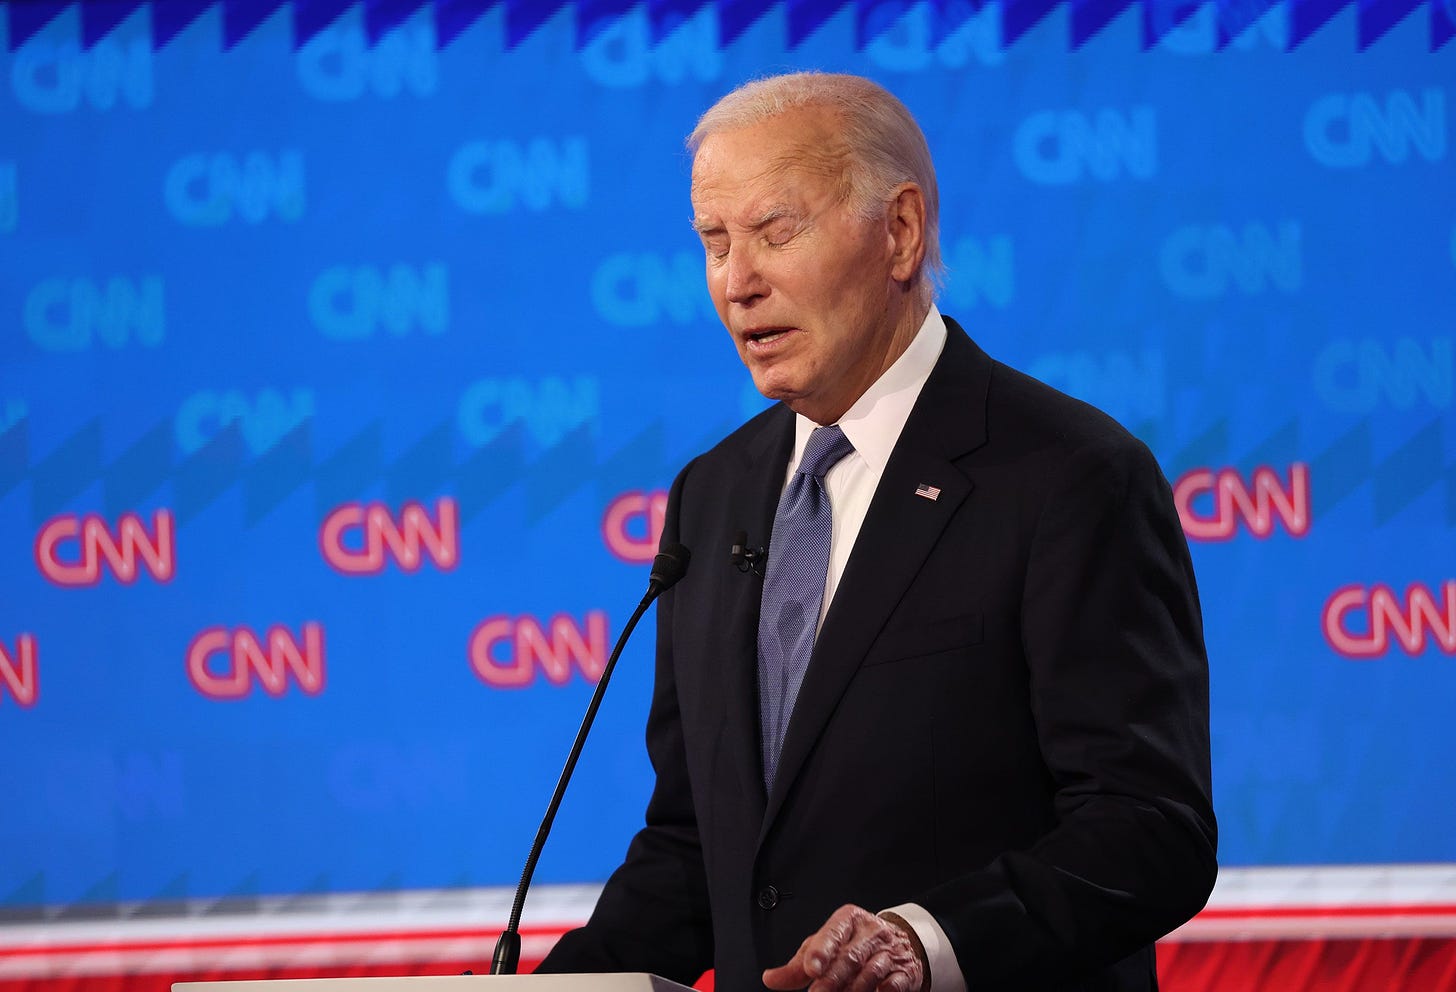 <a href="https://www.cnn.com/politics/live-news/cnn-debate-trump-biden-06-27-24#h_109fa0b98a86513d81c5ff87355c981c" target="_blank">Biden appeared to struggle with his delivery</a> at multiple points during the debate. He cleared his throat or coughed multiple times, a condition that his doctor has previously stated is caused by acid reflux. His voice sounded hoarse and raspy, even more so than usual. <a href="https://www.cnn.com/politics/live-news/cnn-debate-trump-biden-06-27-24#h_ef5bc314213720f37b6a8eb3440c9571" target="_blank">He has been battling a cold in recent days</a>, sources familiar with his debate preparations said.